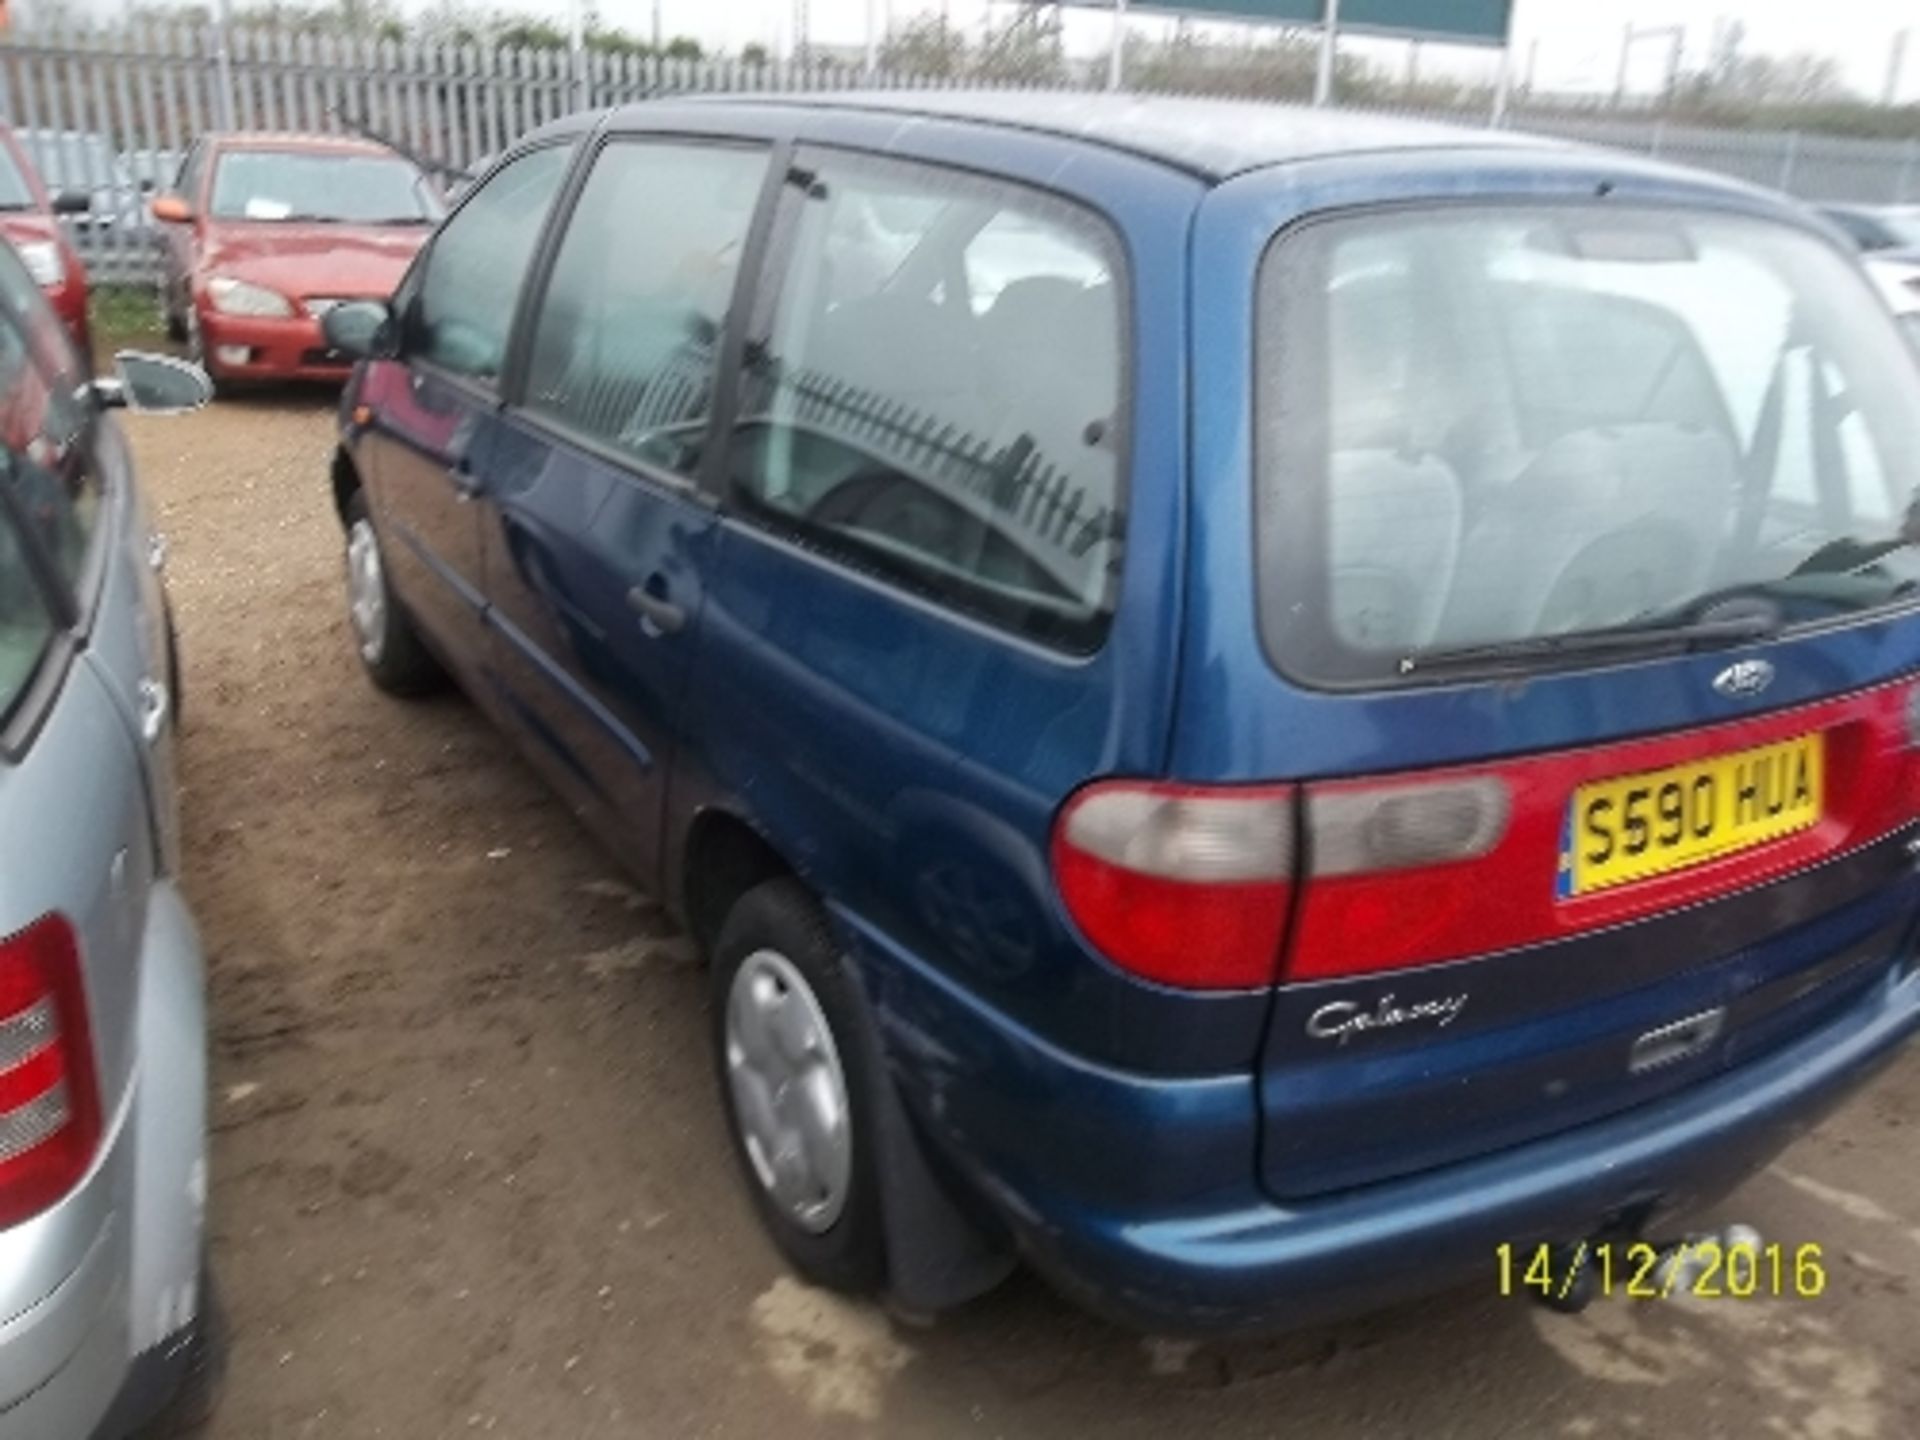 Ford Galaxy GLX - S590 HUA Date of registration: 01.08.1998 1896cc, diesel, manual, blue Odometer - Image 4 of 4